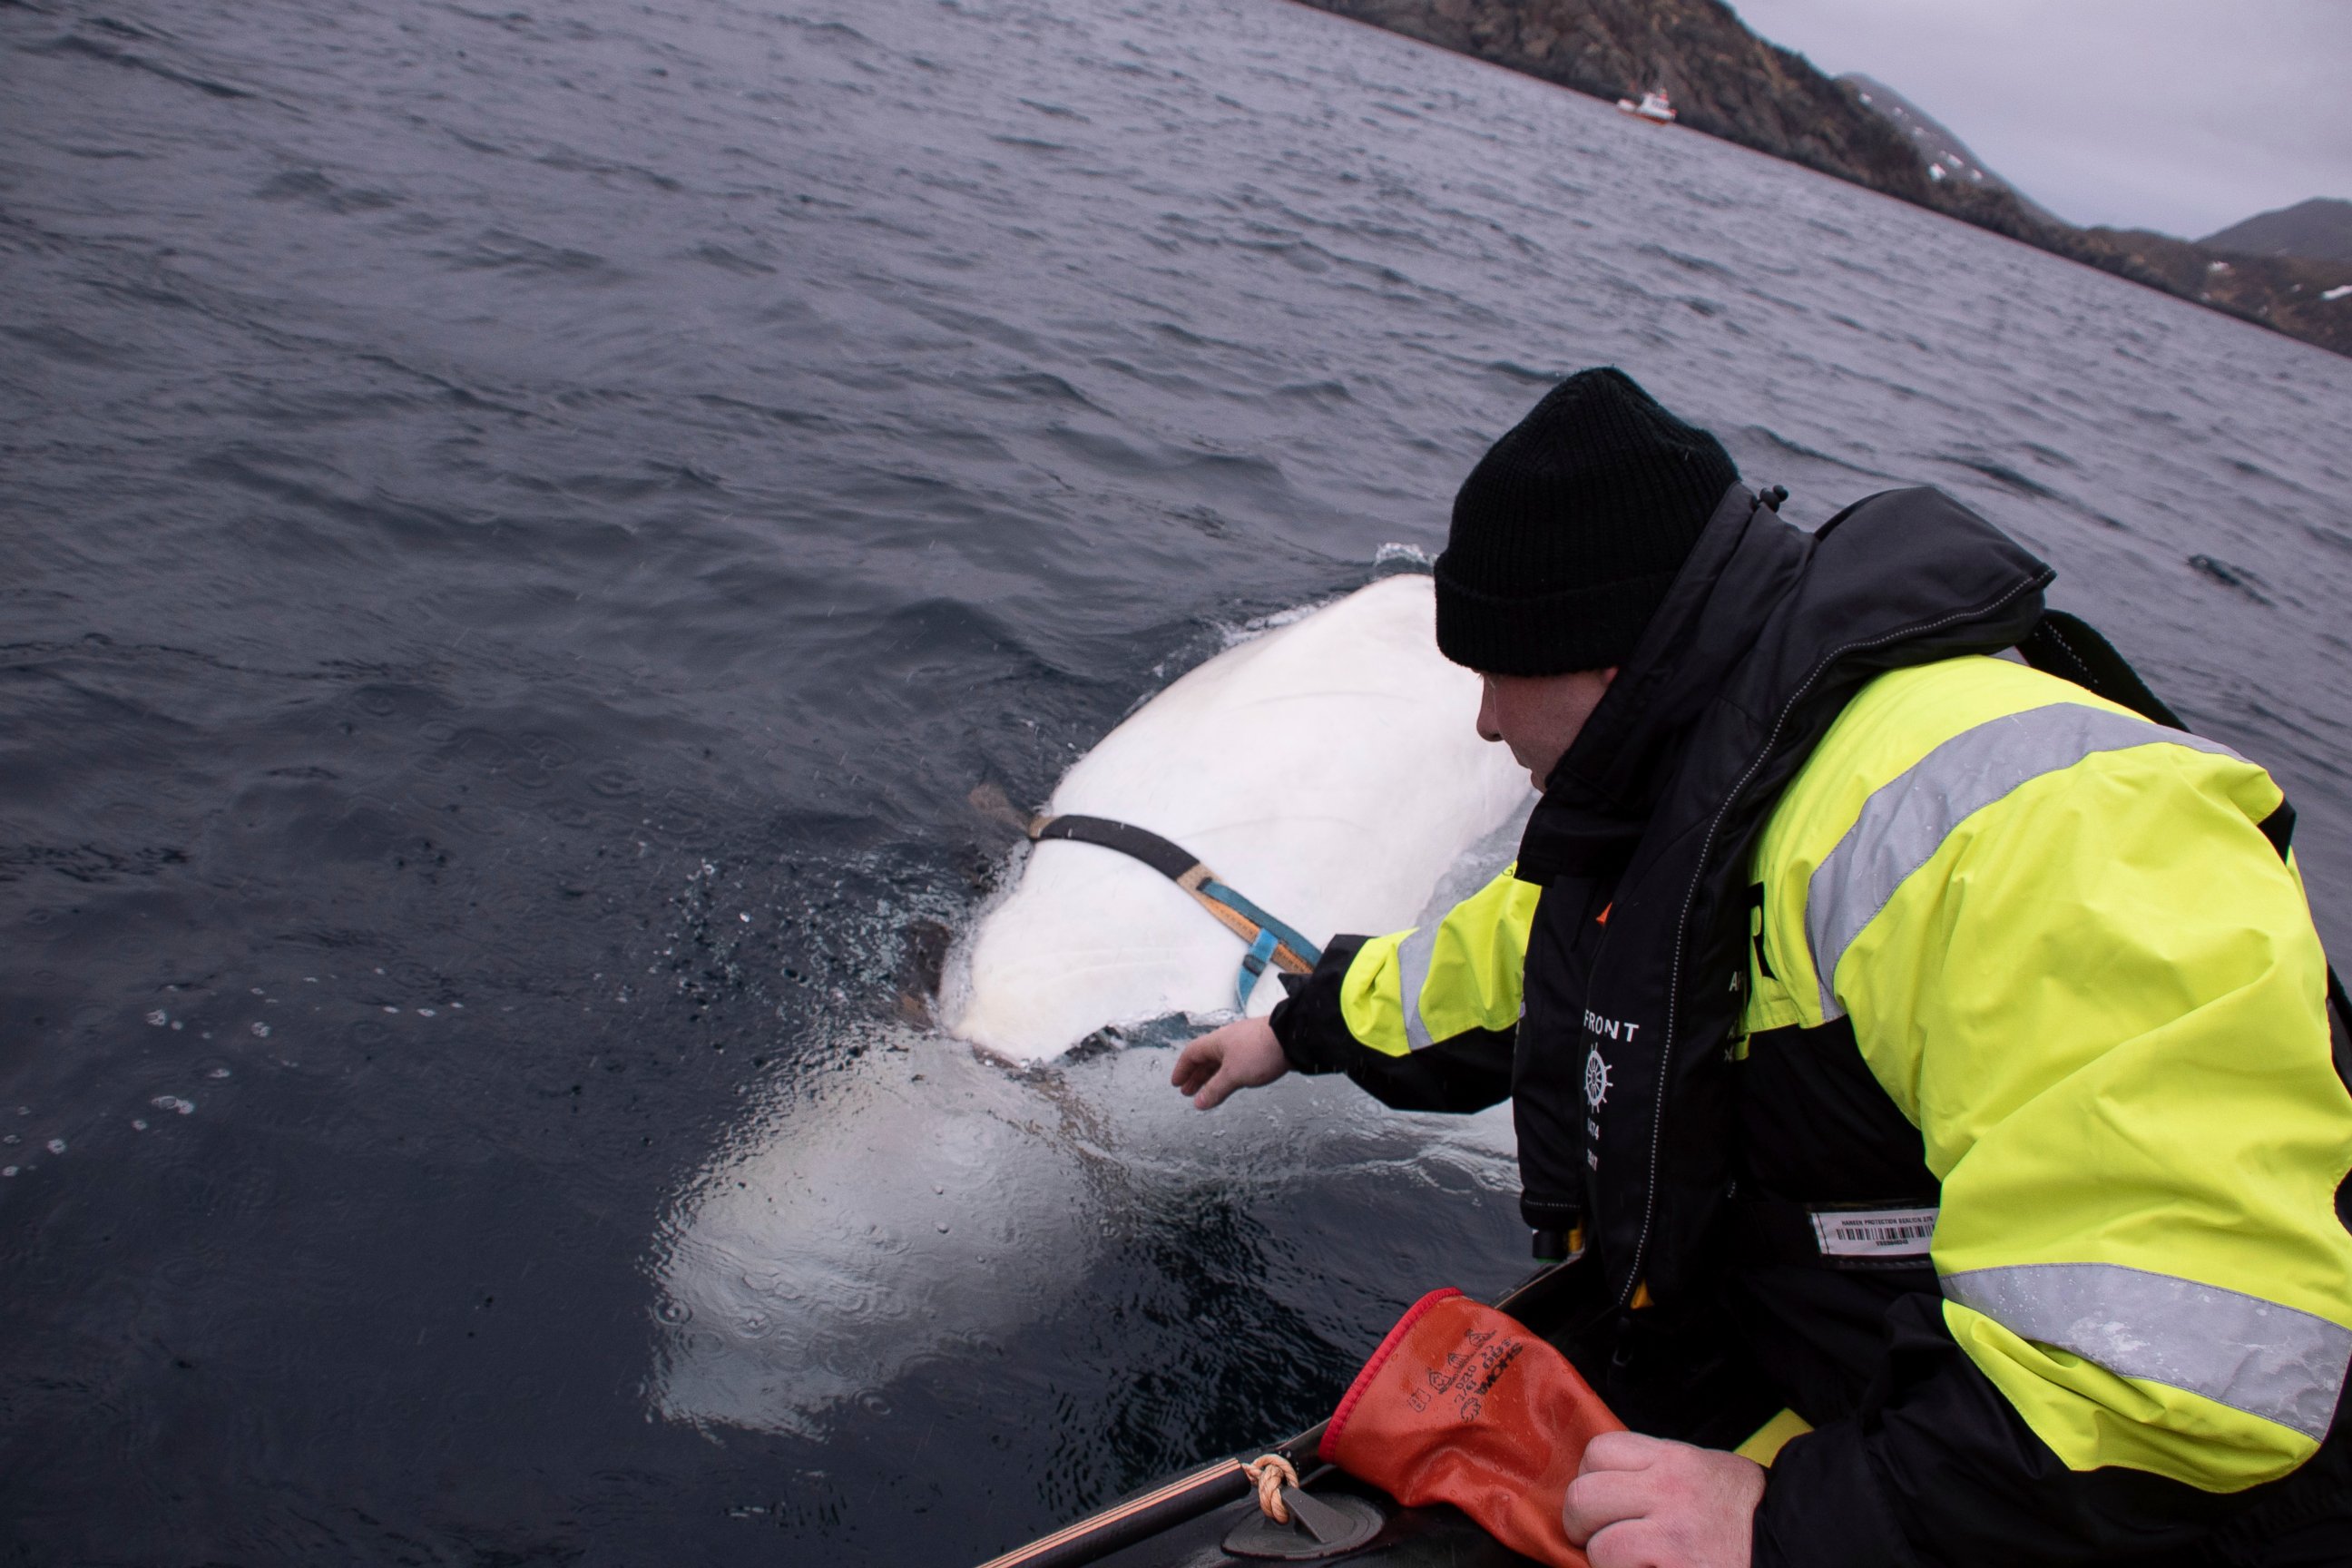 PHOTO: Joergen Ree Wiig tries to reach the harness attached to a beluga whale before the Norwegian fishermen were able to removed the tight harness, off the northern Norwegian coast Friday, April 26, 2019.